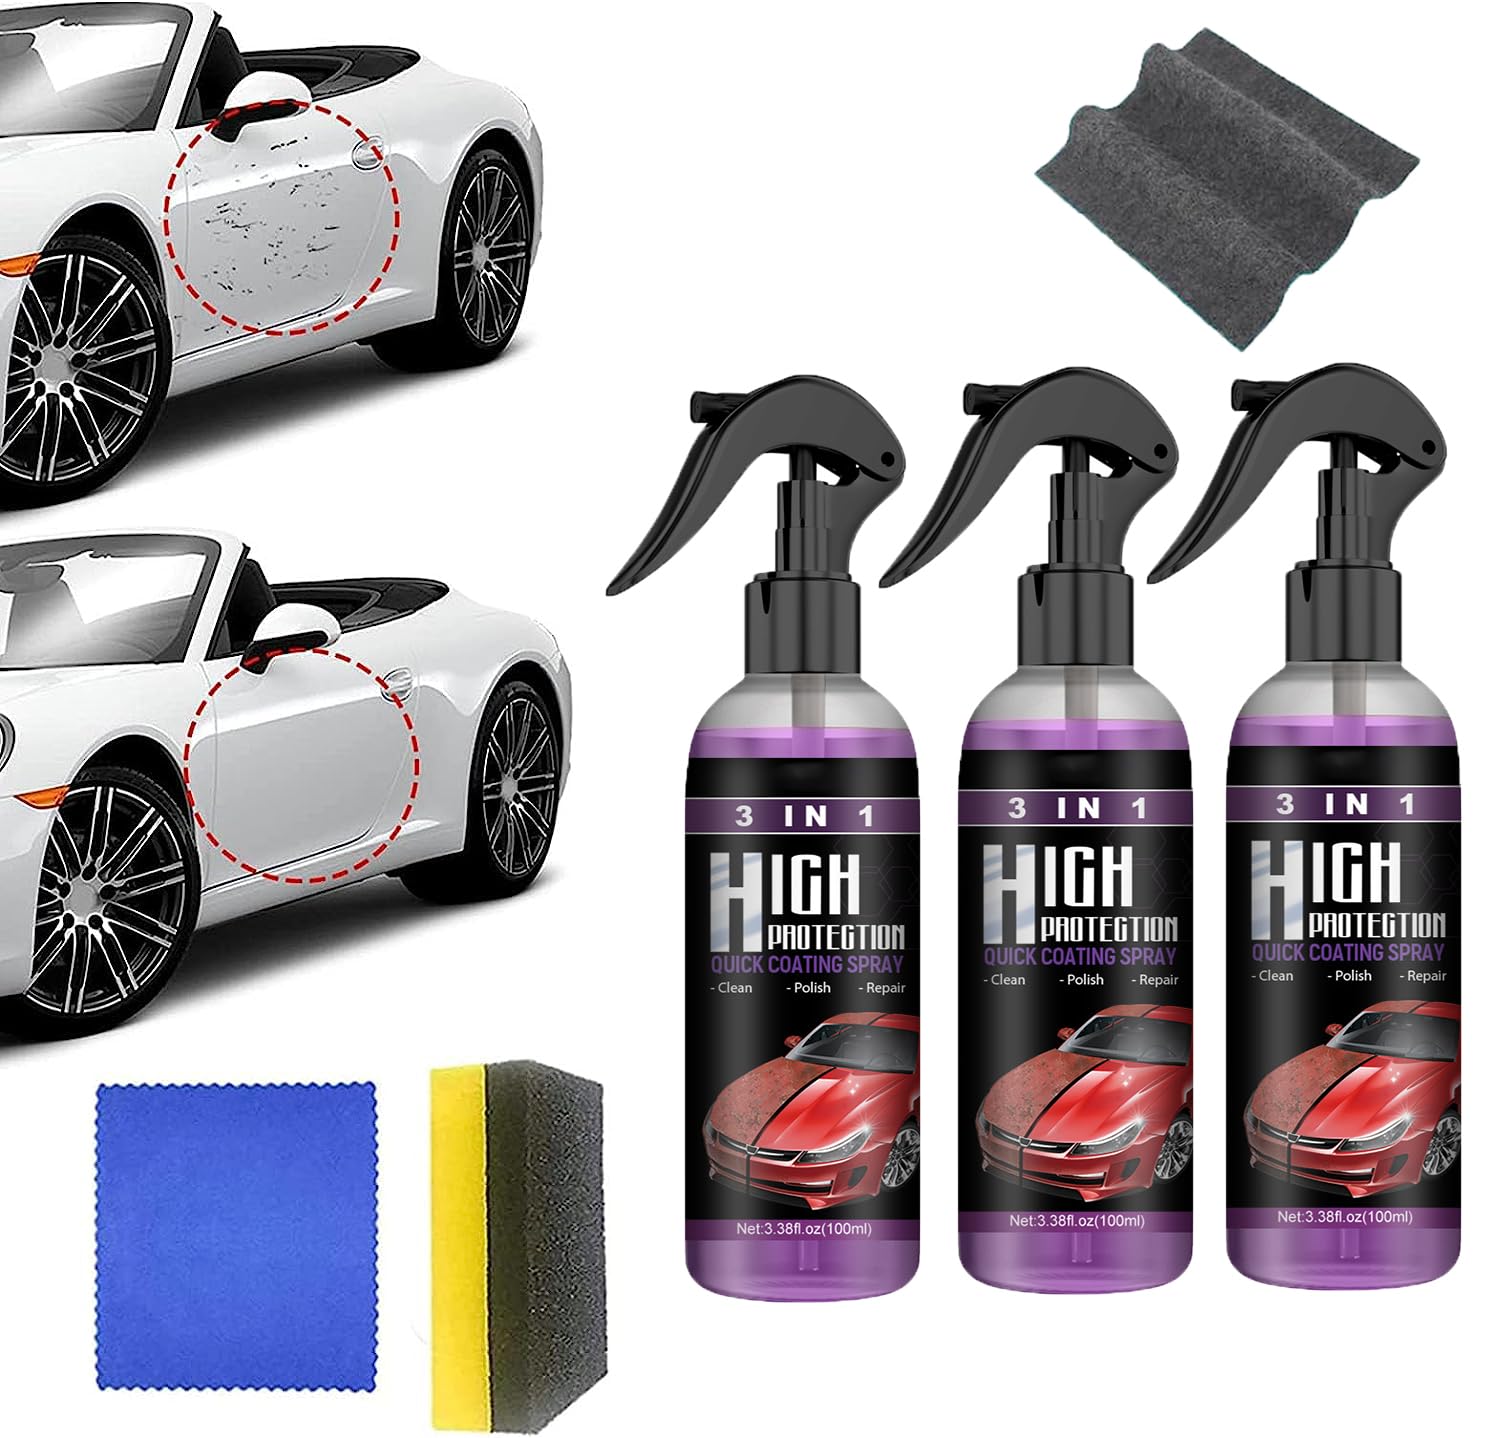 INHLUGLK High Protection 3 in 1 Spray, 3 in 1 Ceramic Car Coating Spray,  Quick Waxing Polishing for Car, Nano Coating Spray for Cars, 3 in 1 High